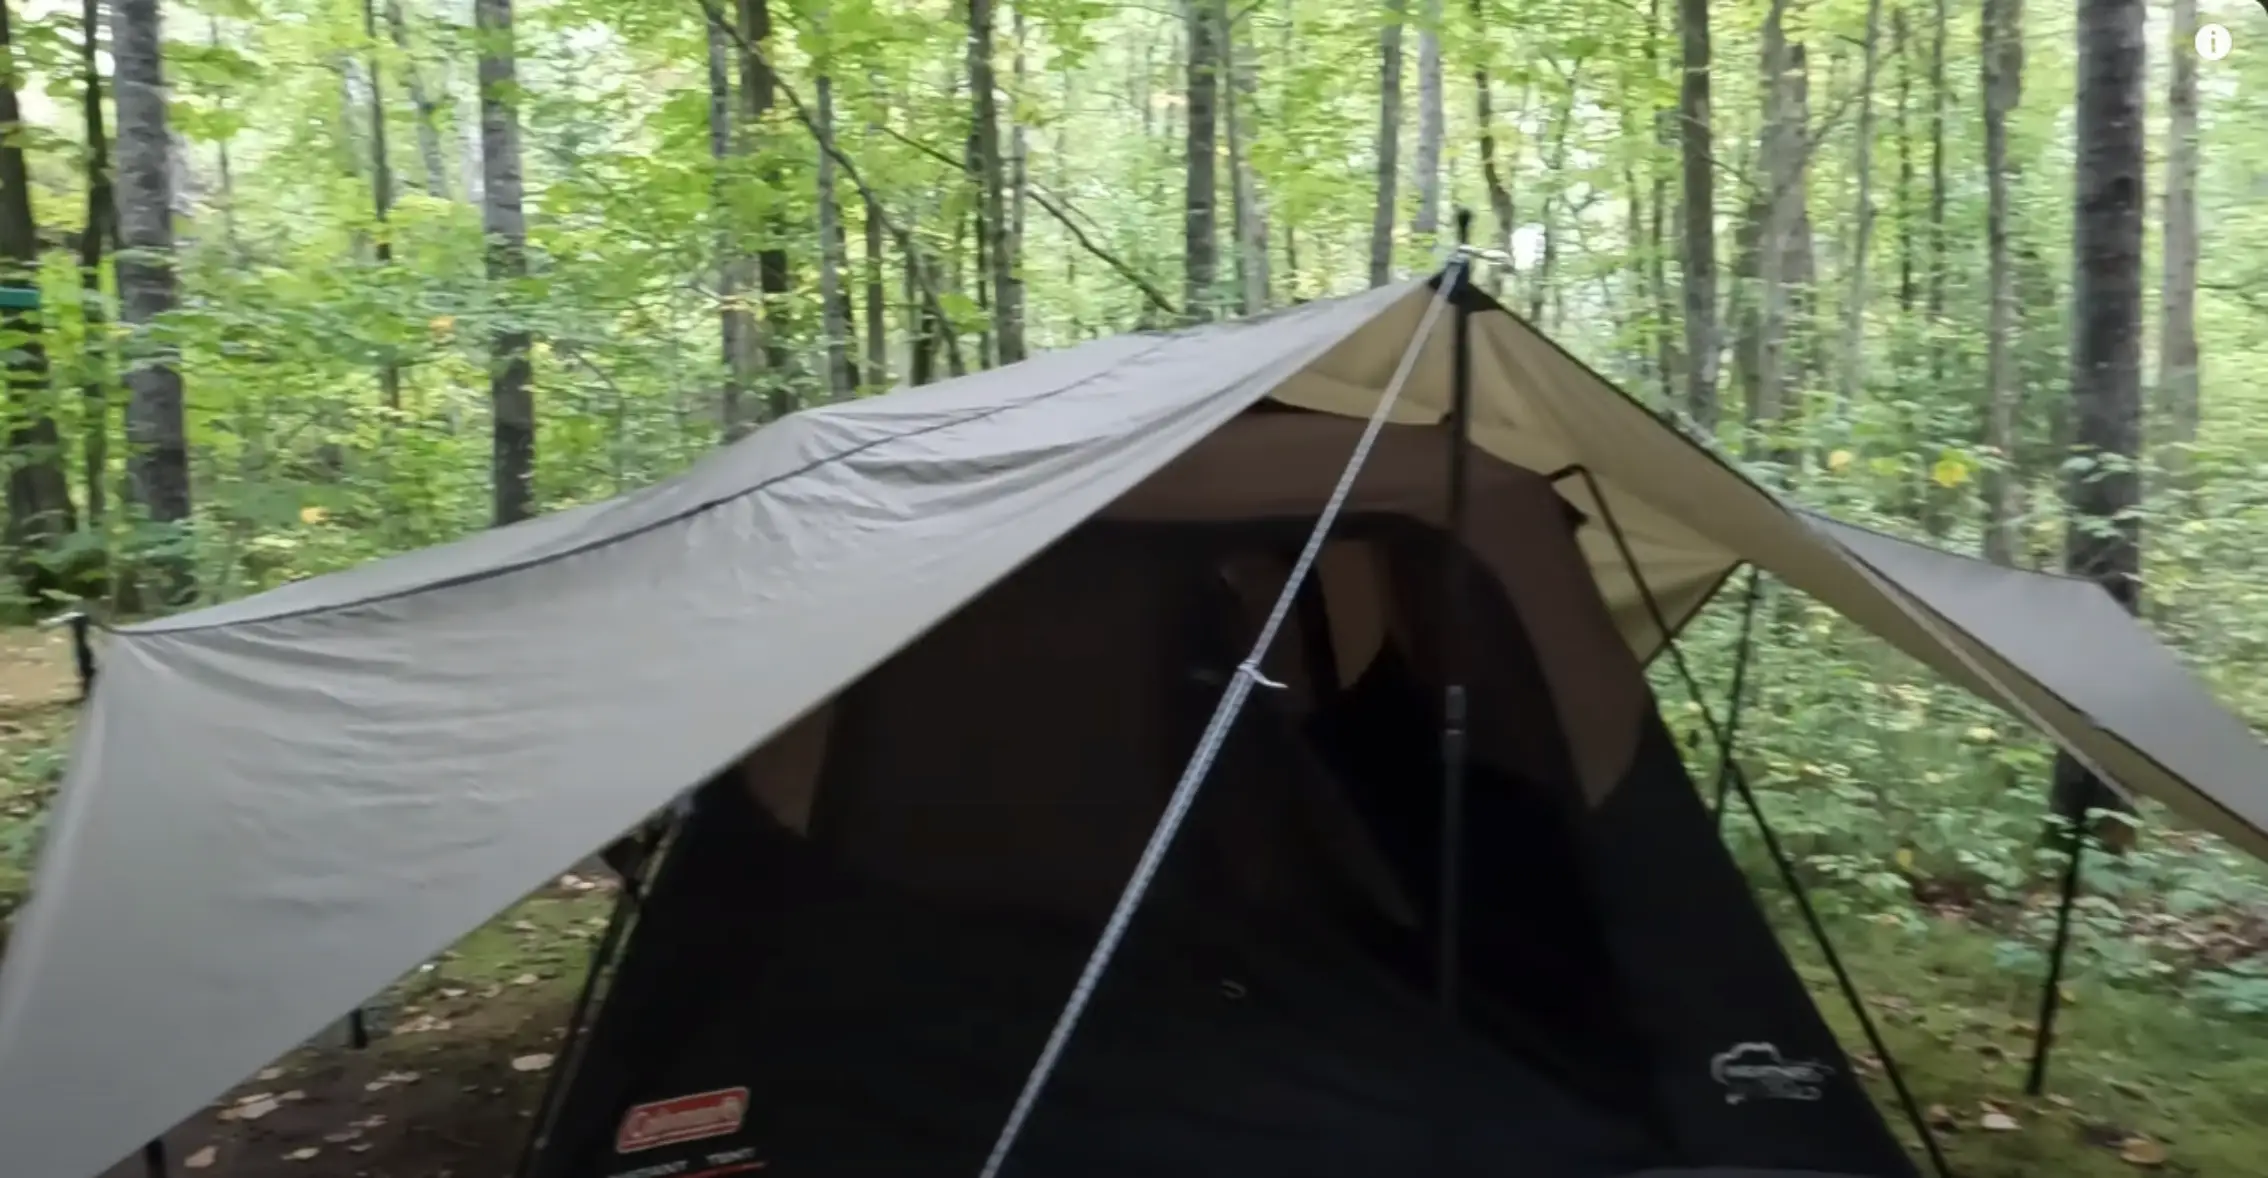 7 Reasons why a tarp should be put over your tent